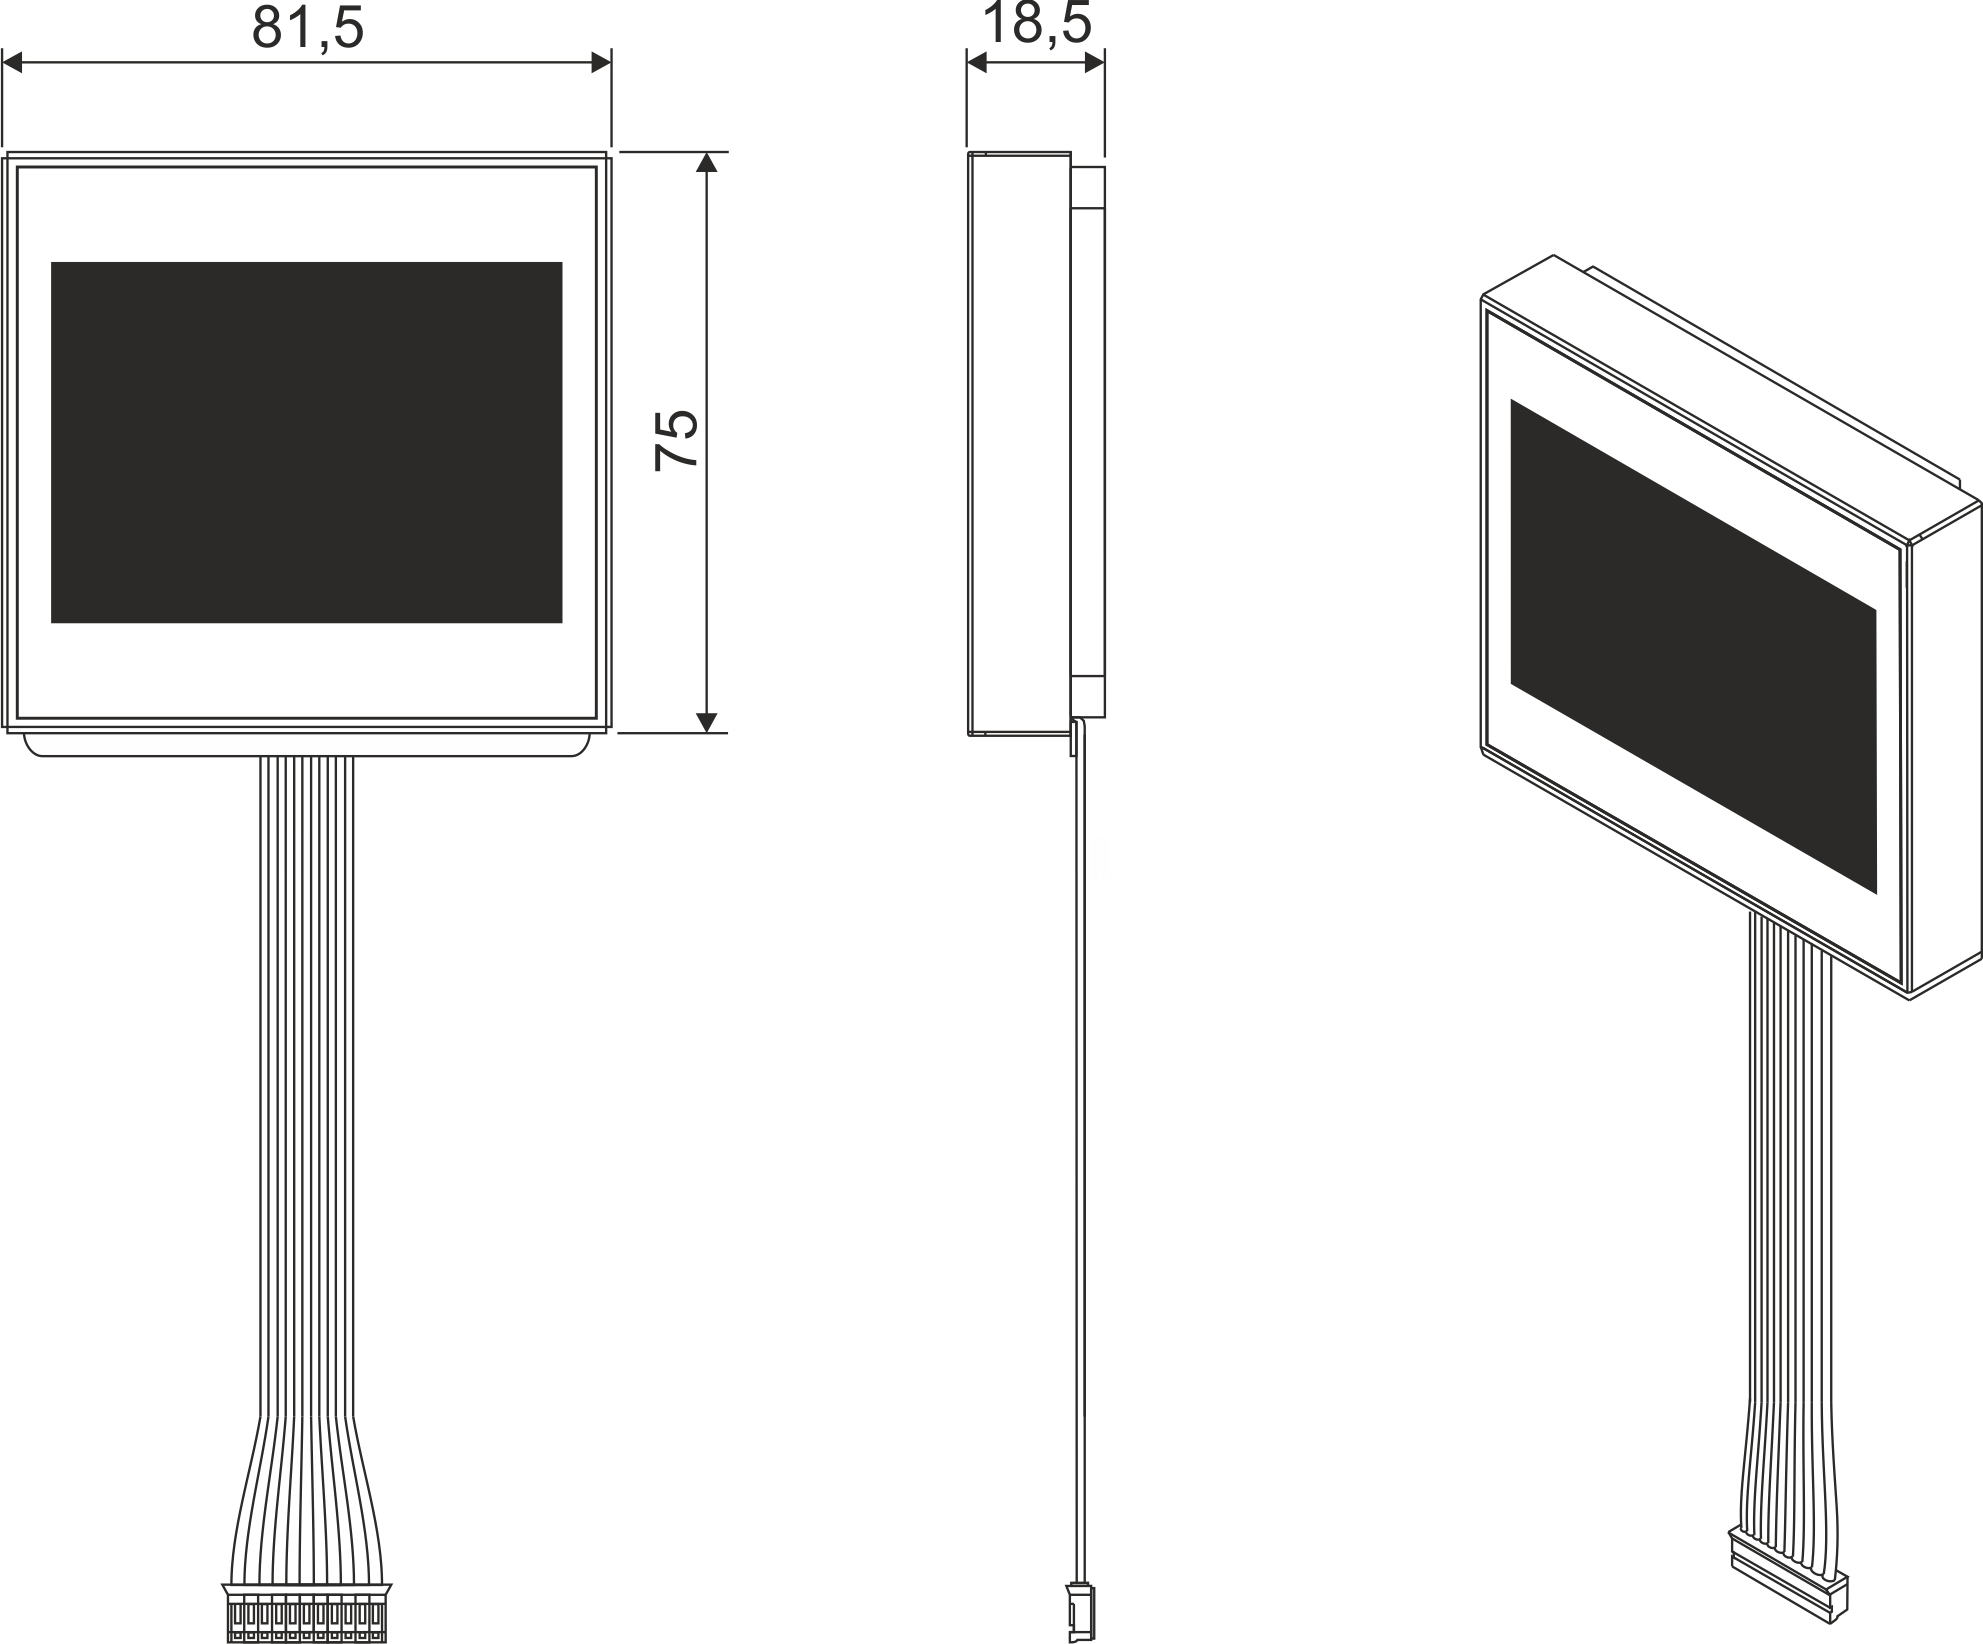 UP800 LCD 3,5” Display module LCD 3,5” - Dimensions